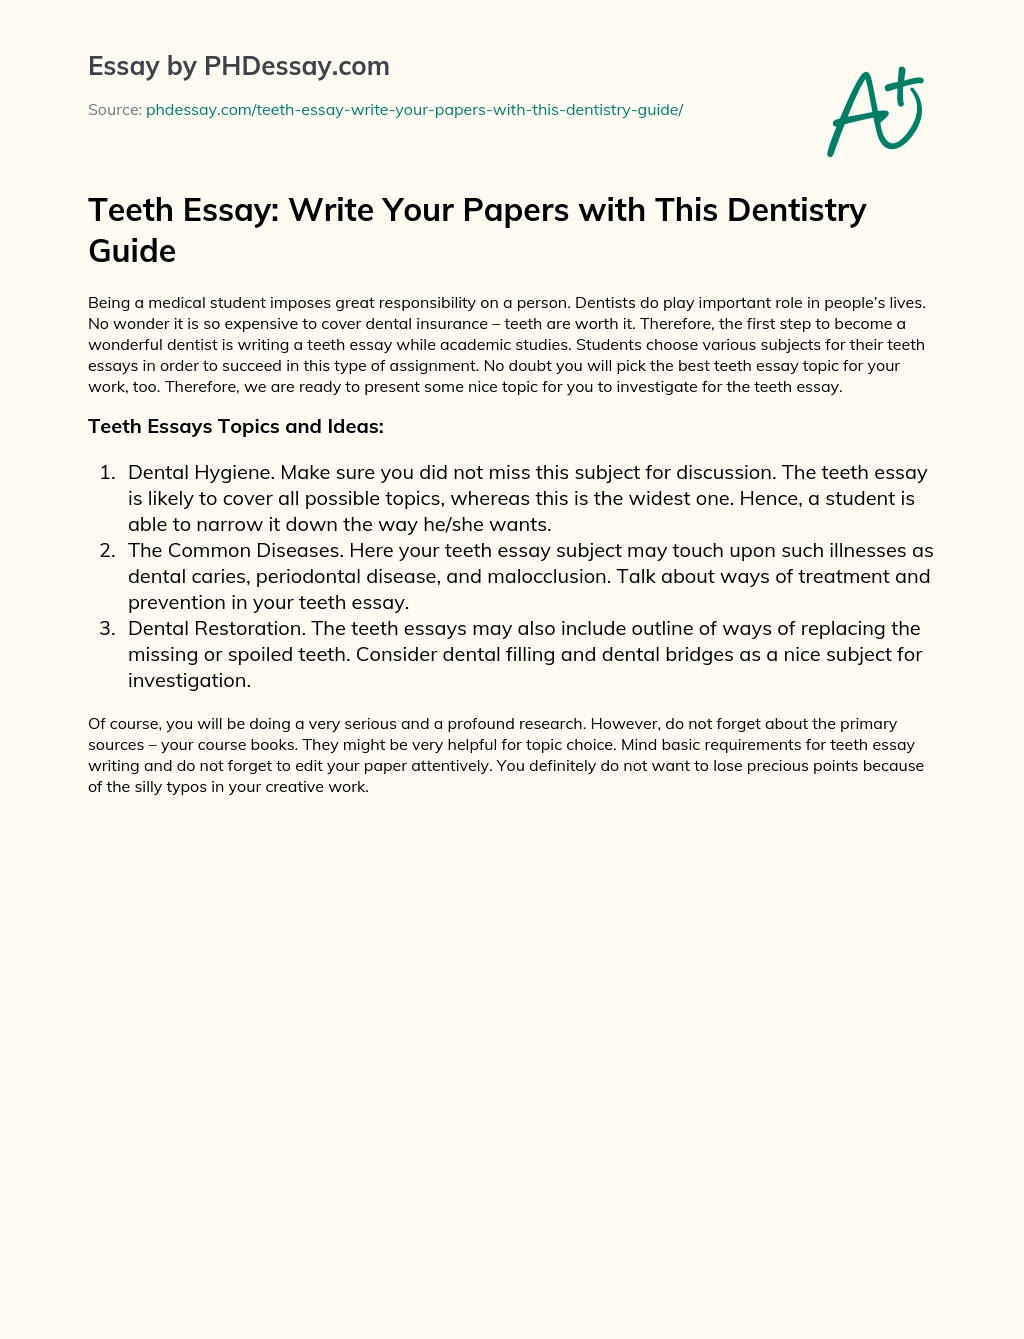 thesis topic in dentistry